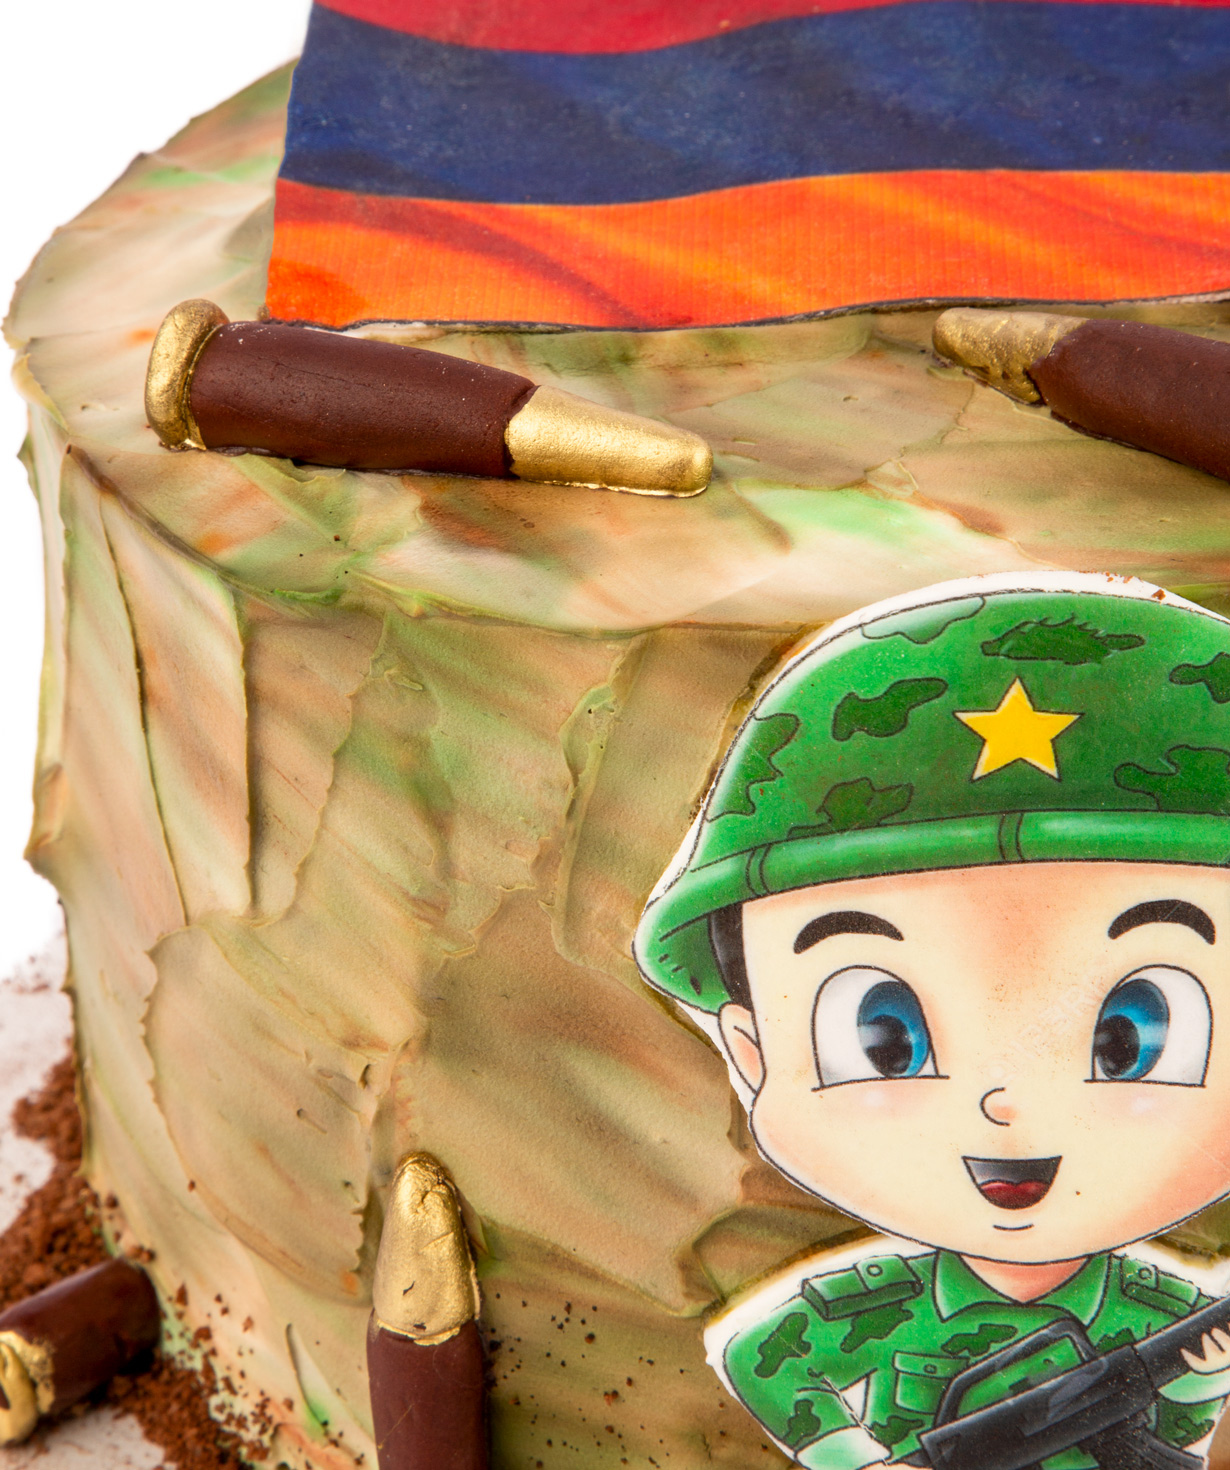 Cake `Soldier`